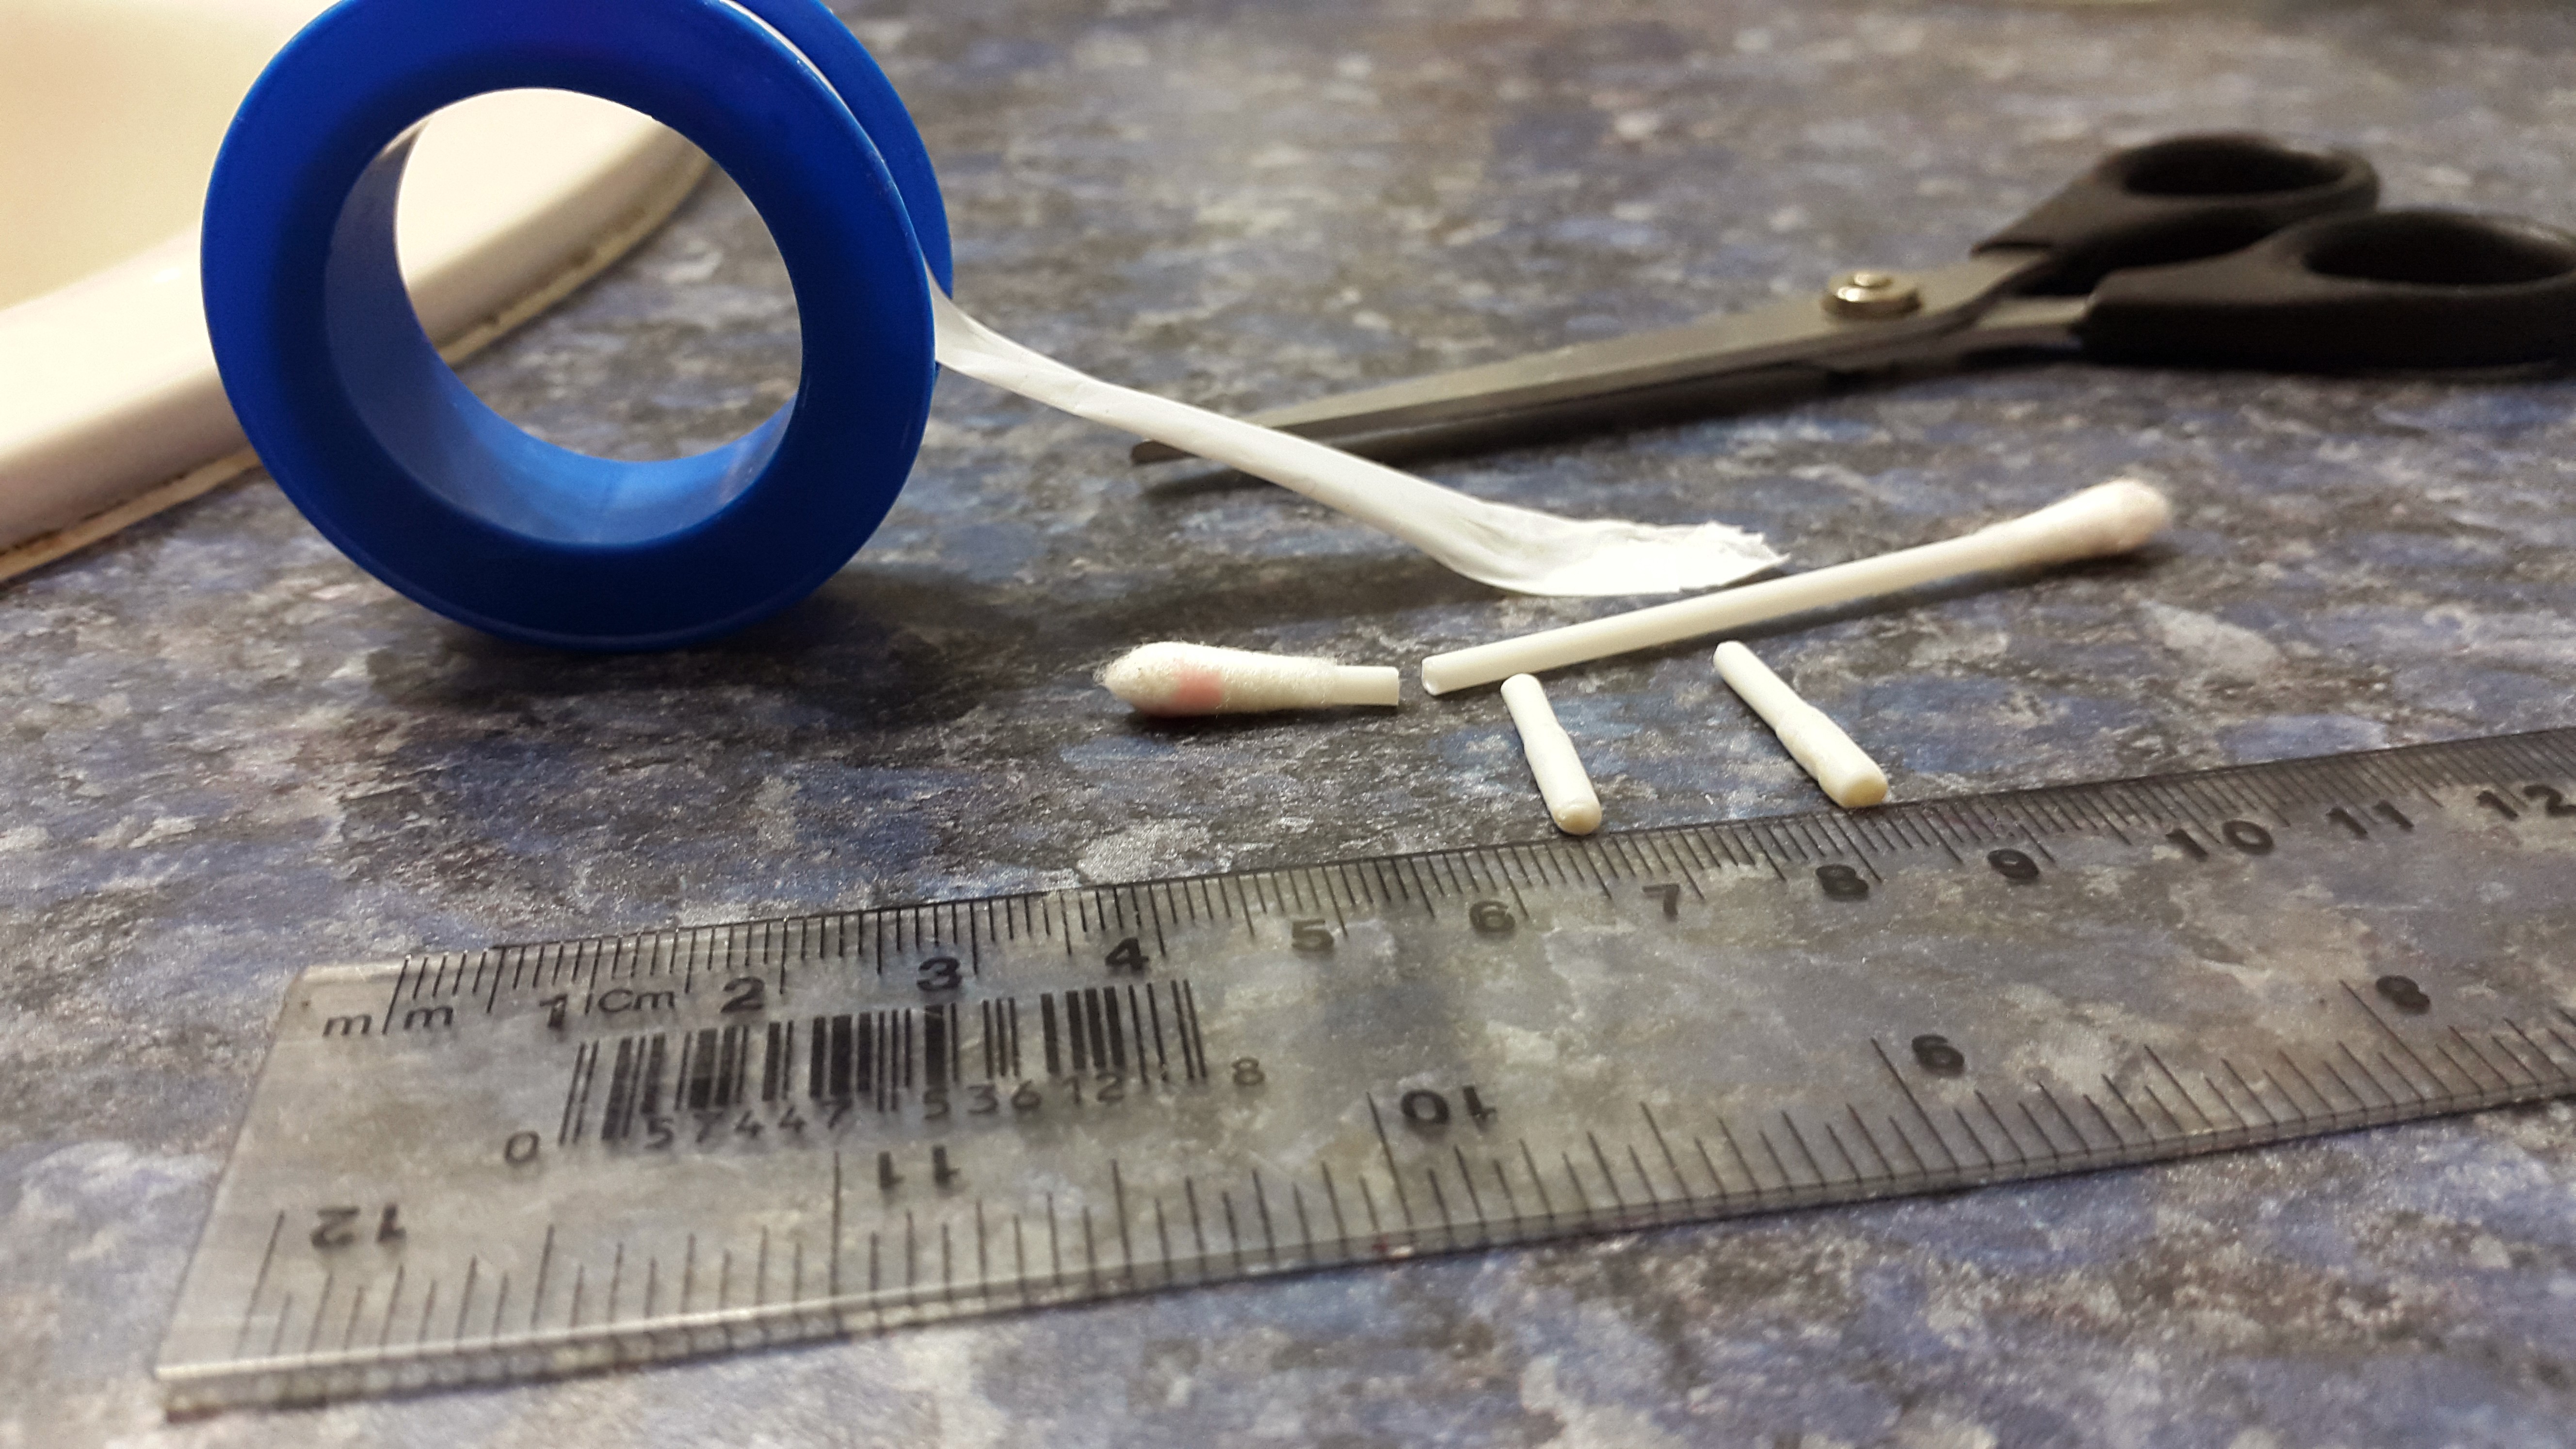 Build your own flesh plugs from cotton swabs and PTFE tape